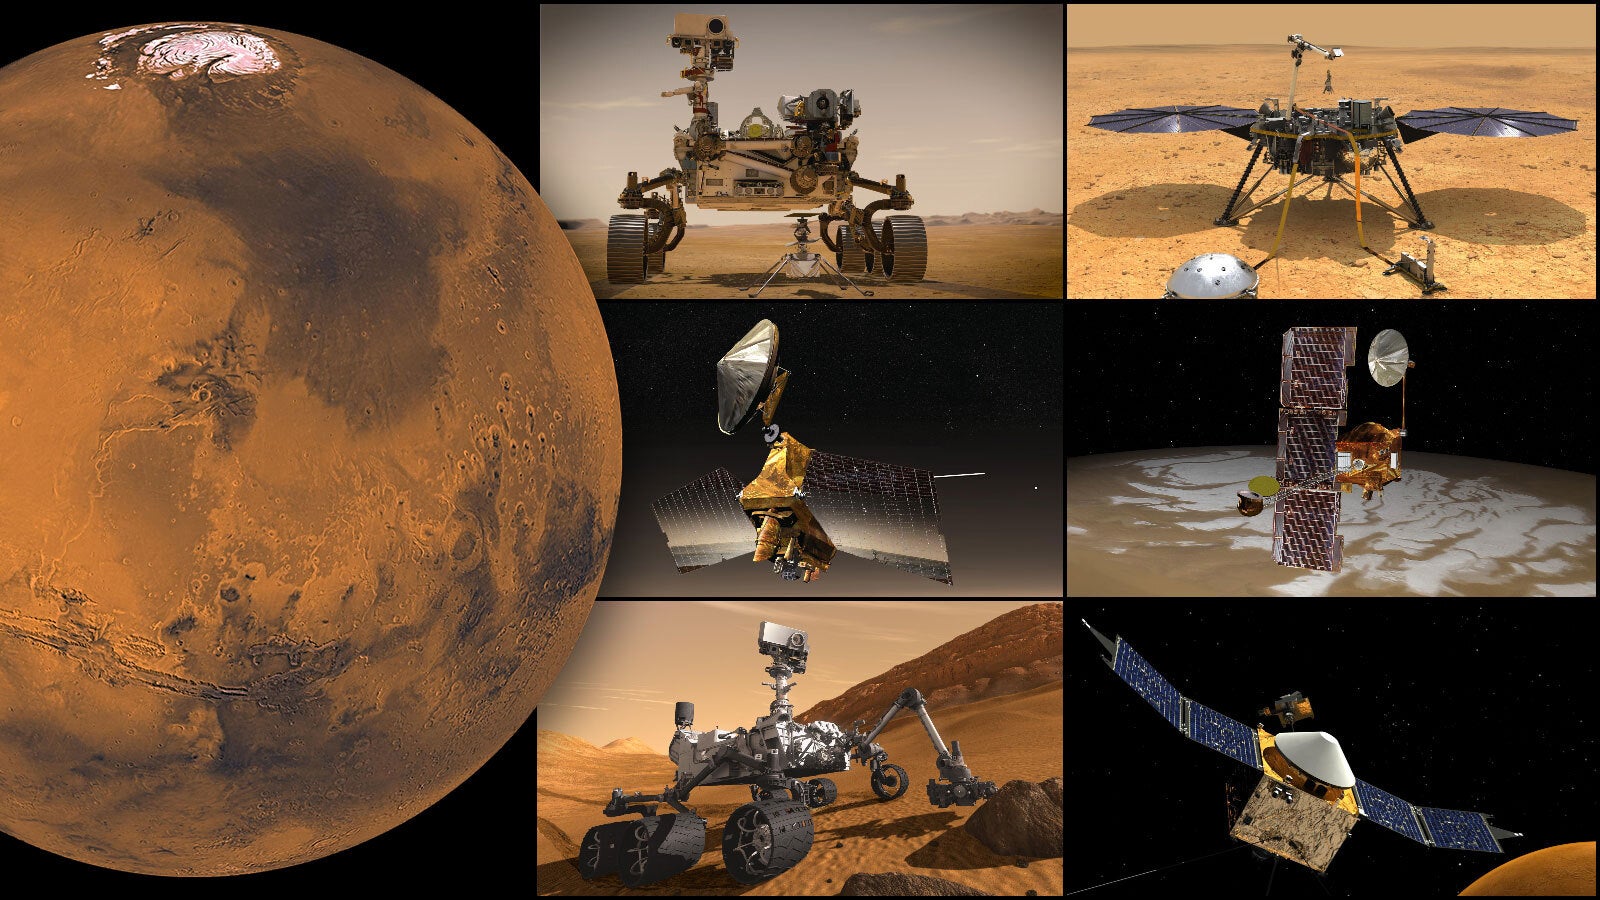 Illustrations showing Nasa’s Mars missions, clockwise from top left: Perseverance rover and Ingenuity Mars Helicopter (in first top-left image), InSight lander, Odyssey orbiter, MAVEN orbiter, Curiosity rover and Mars Reconnaissance Orbiter